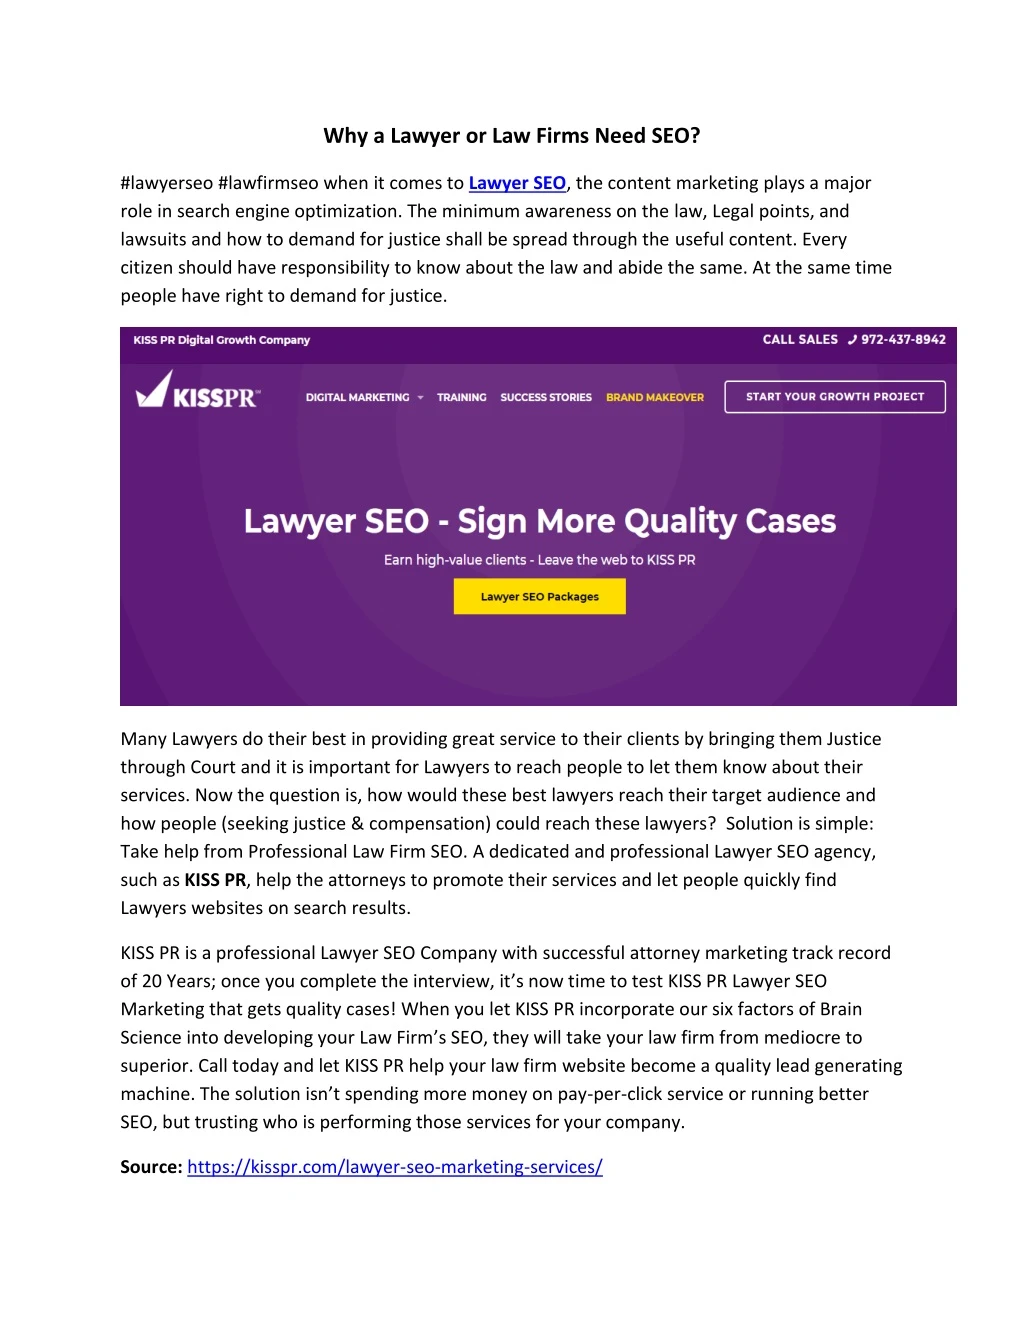 why a lawyer or law firms need seo